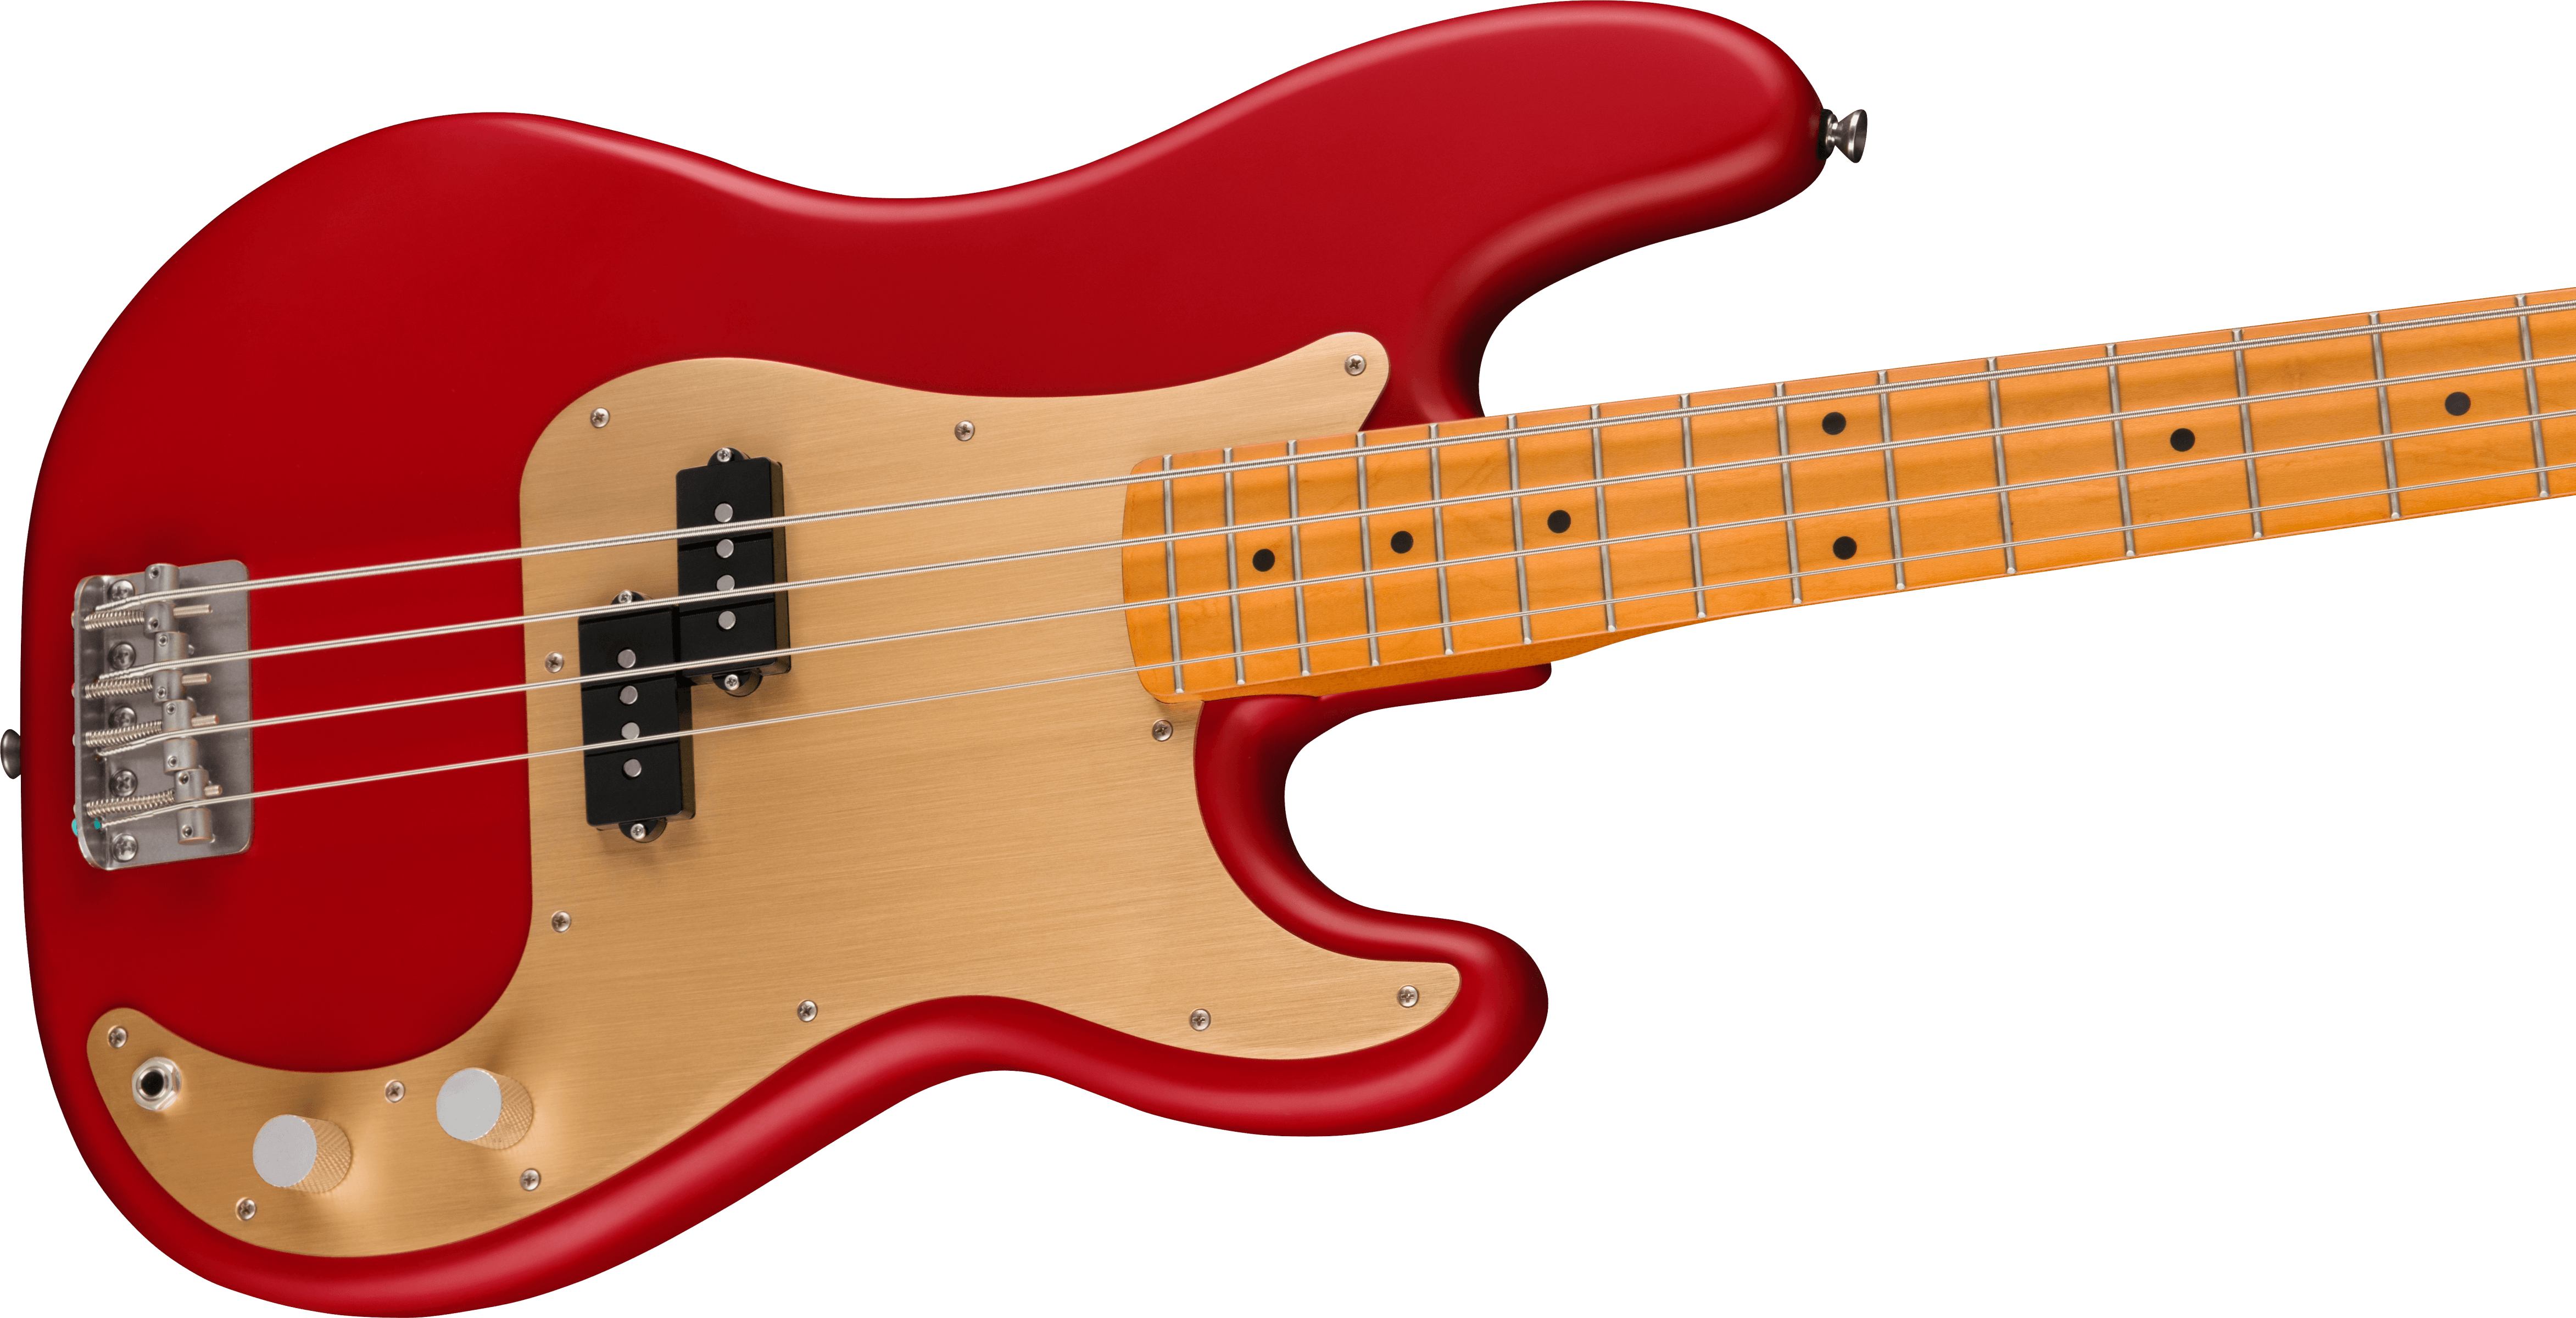 Squier Precision Bass 40th Anniversary Gold Edition Mn - Satin Dakota Red - Basse Électrique Solid Body - Variation 3